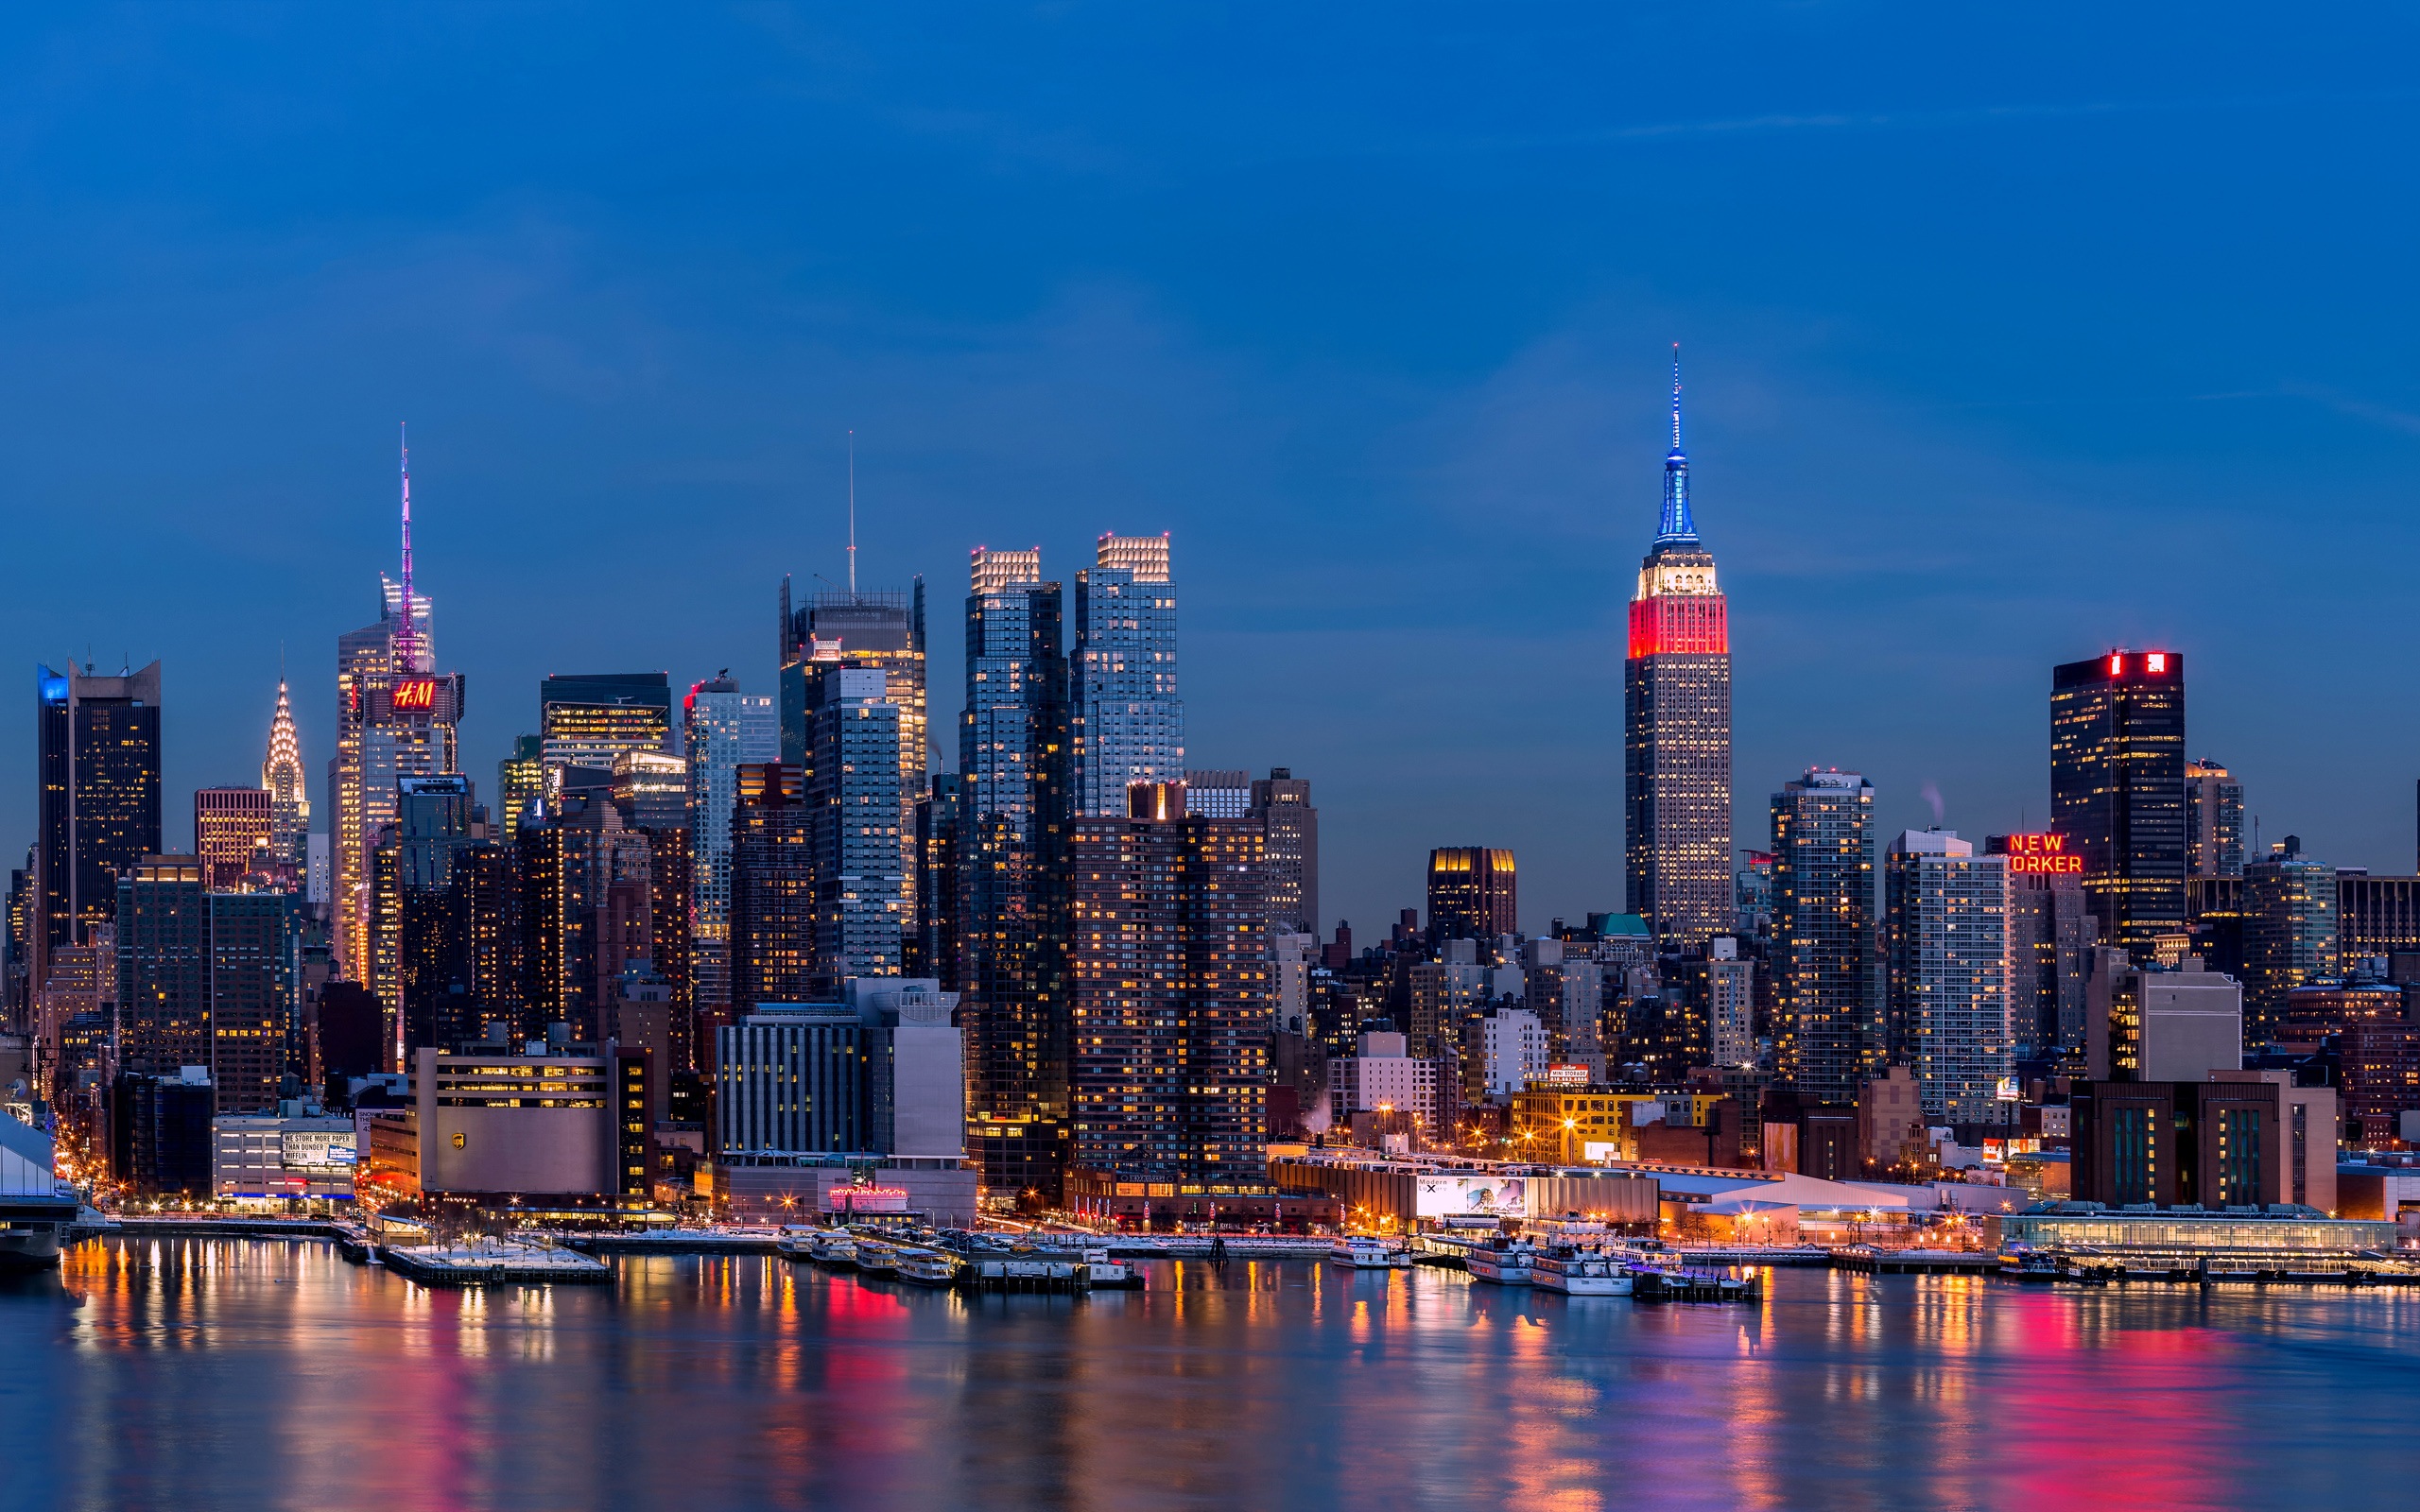 Empire State Building in New York, city night HD wallpapers #20 - 2560x1600